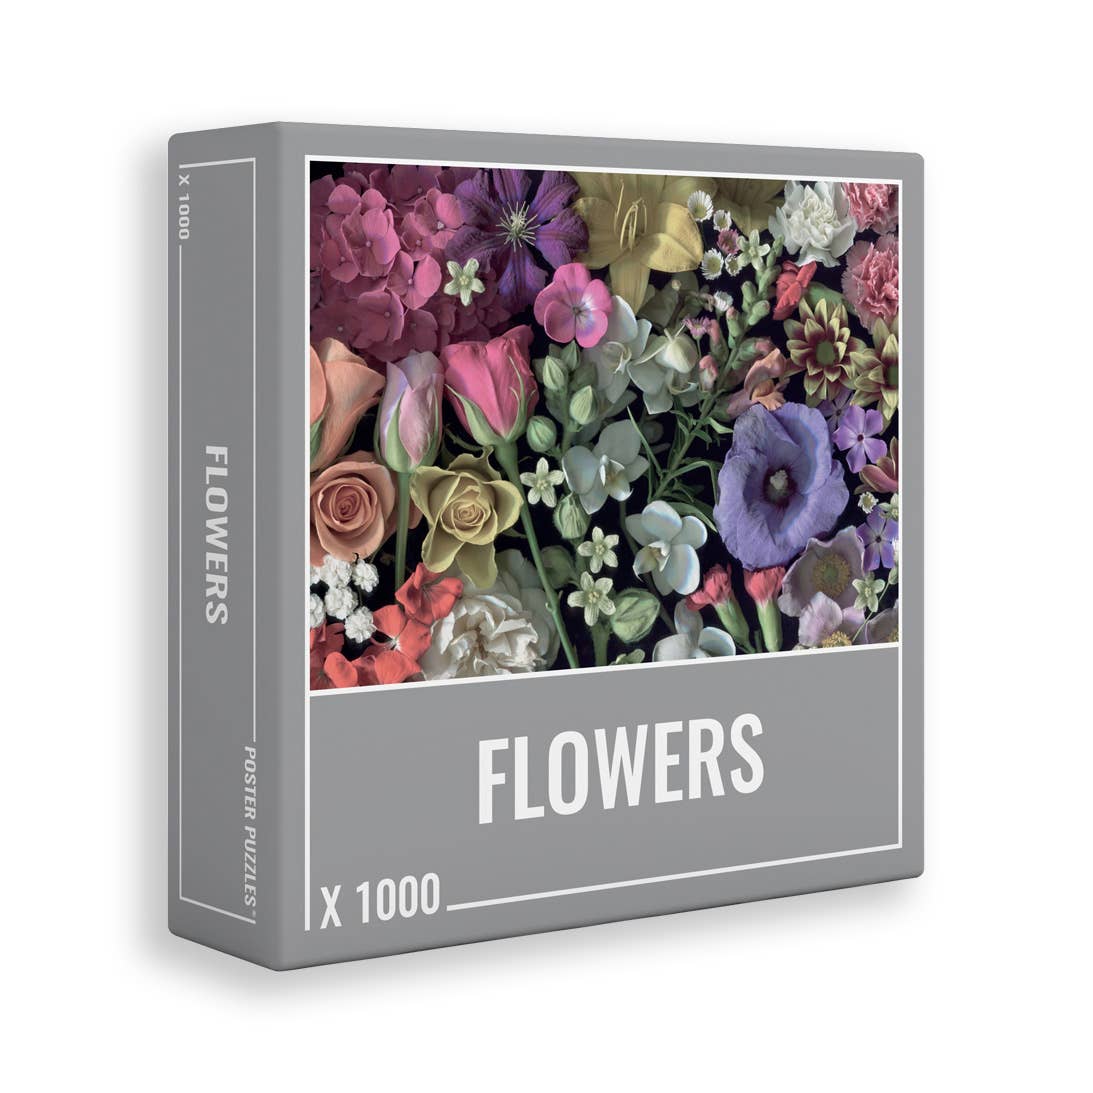 Flowers 1000 Piece Jigsaw Puzzle by Cloudberries - Floral Fun for Adults